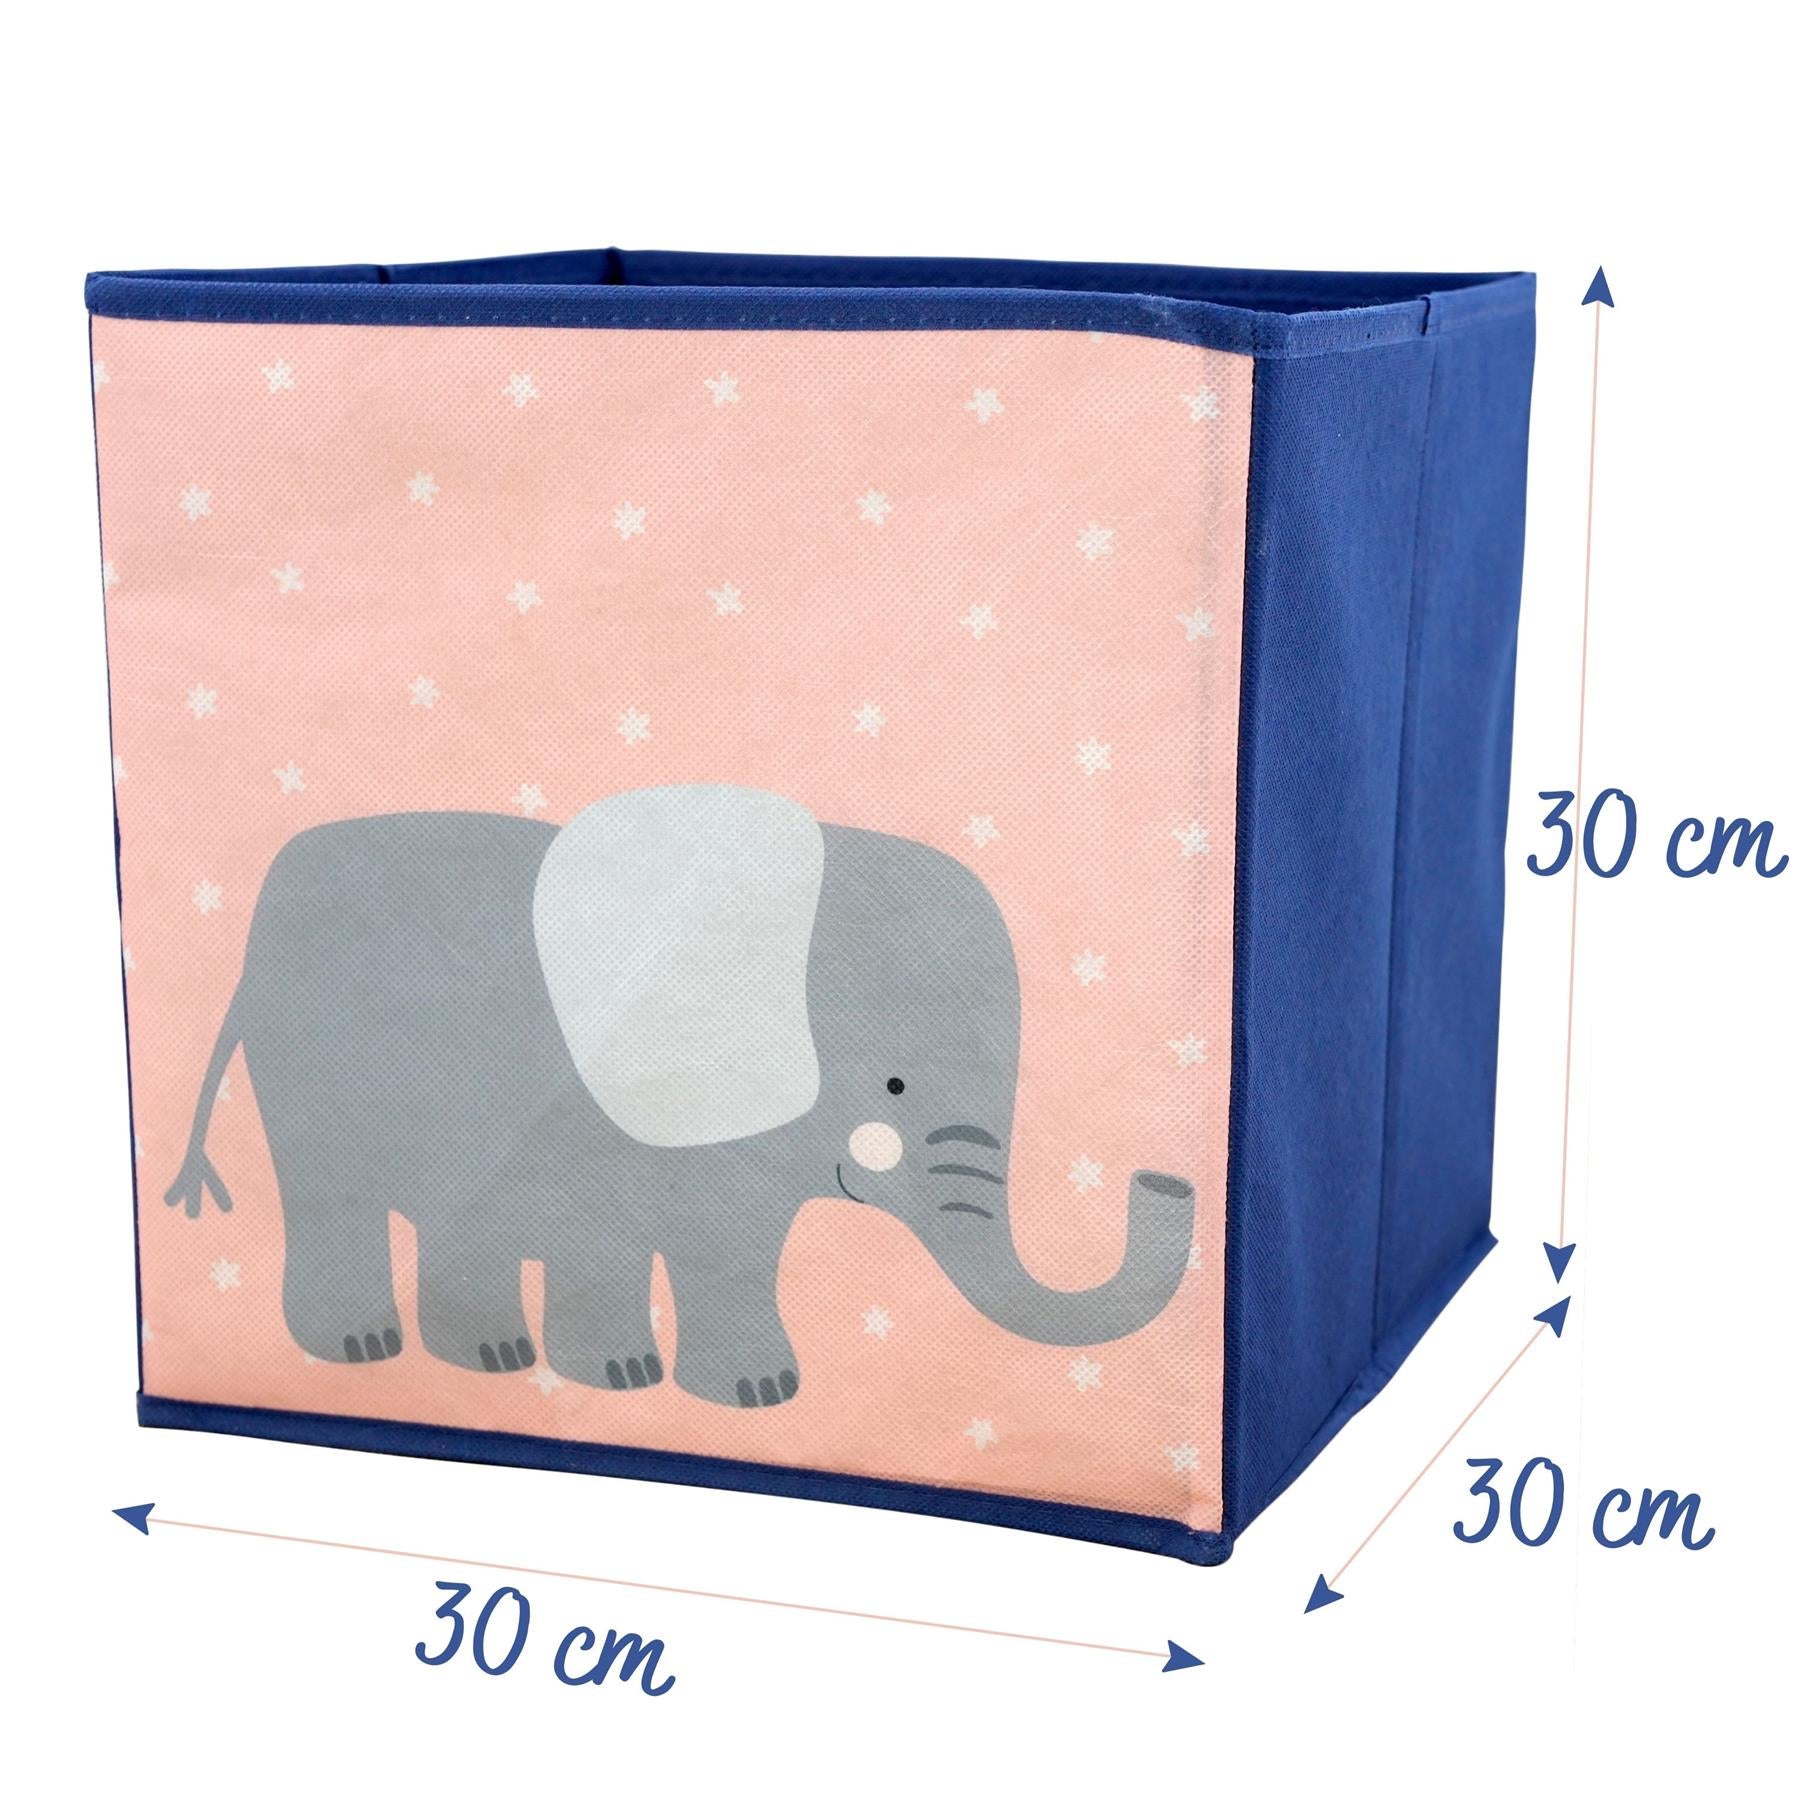 Elephant Design Foldable Storage Box by The Magic Toy Shop - The Magic Toy Shop